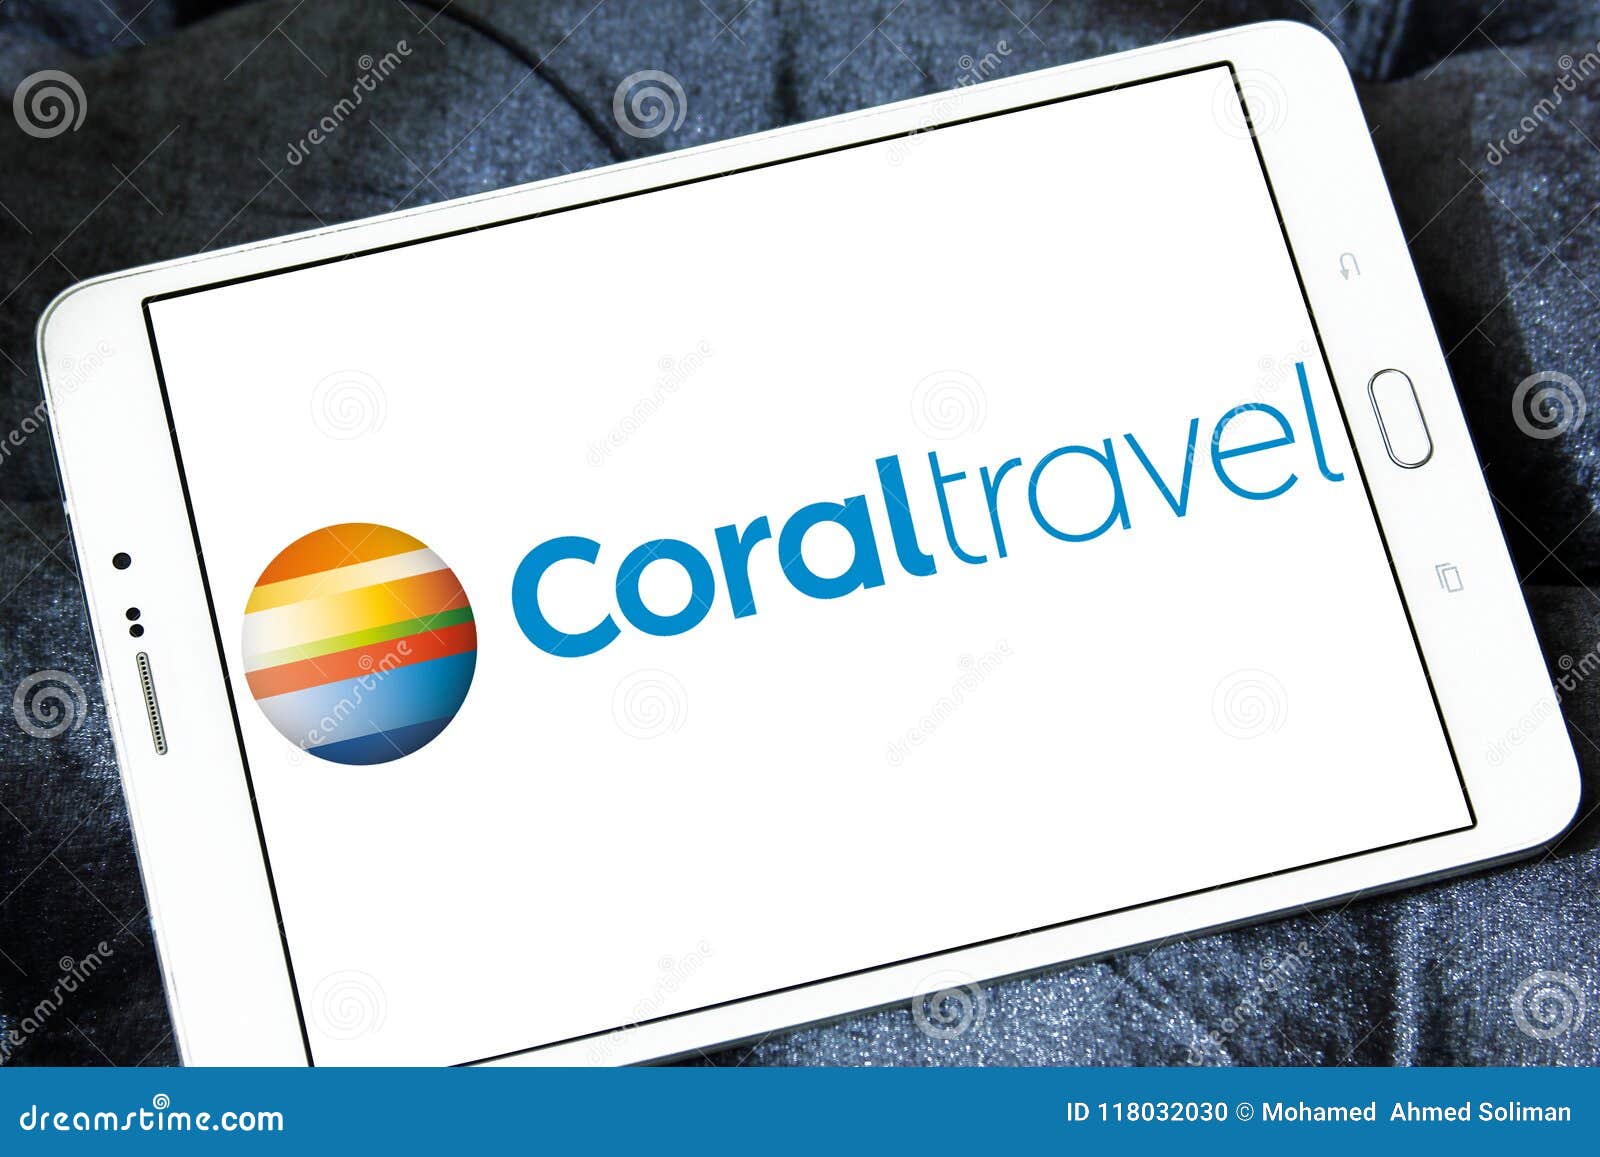 coral travel agency